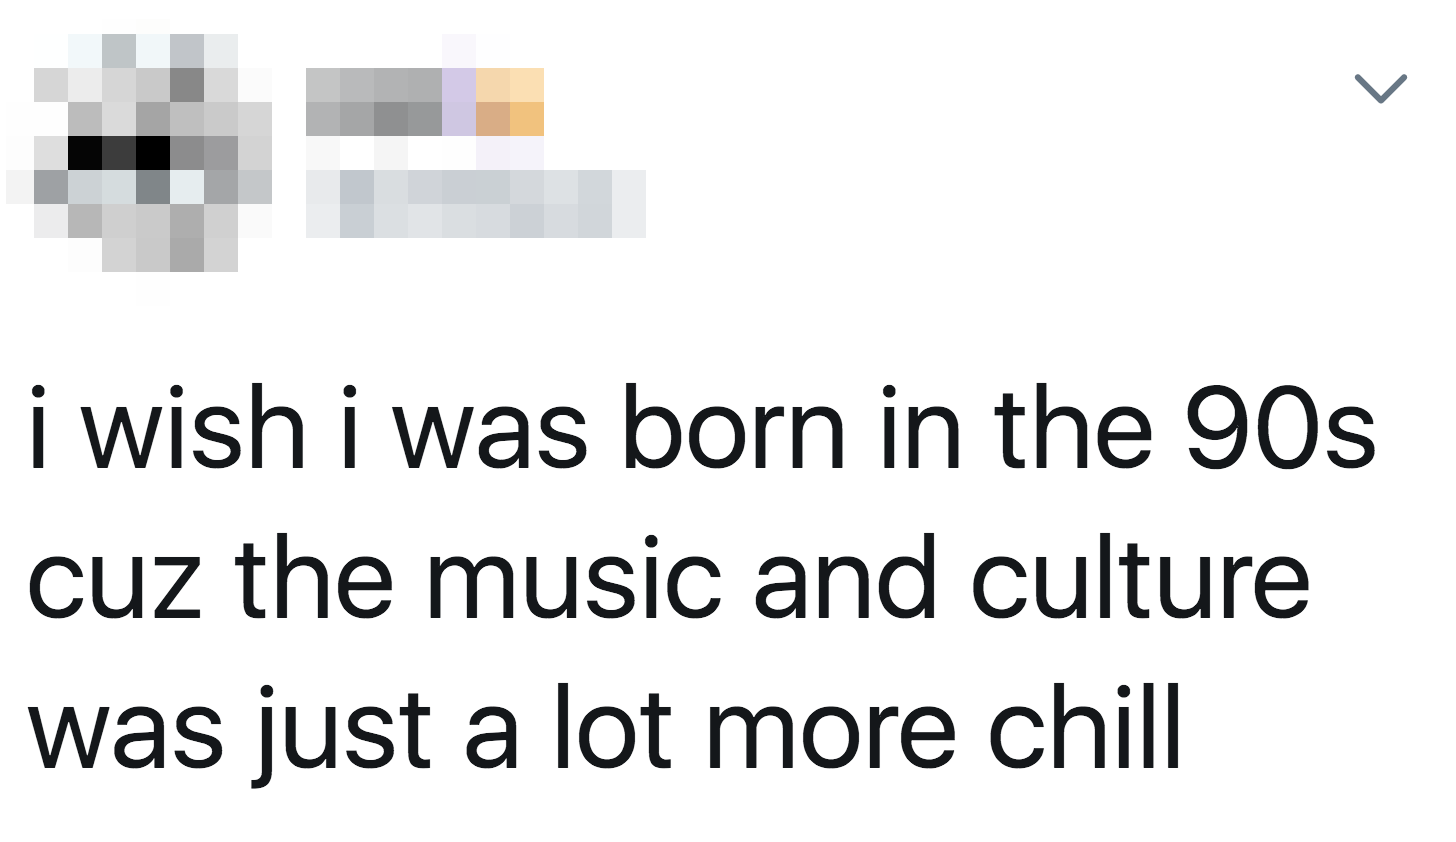 tweet reading i wish i was born in the 90s cuz the music and culture was just a lot more chill